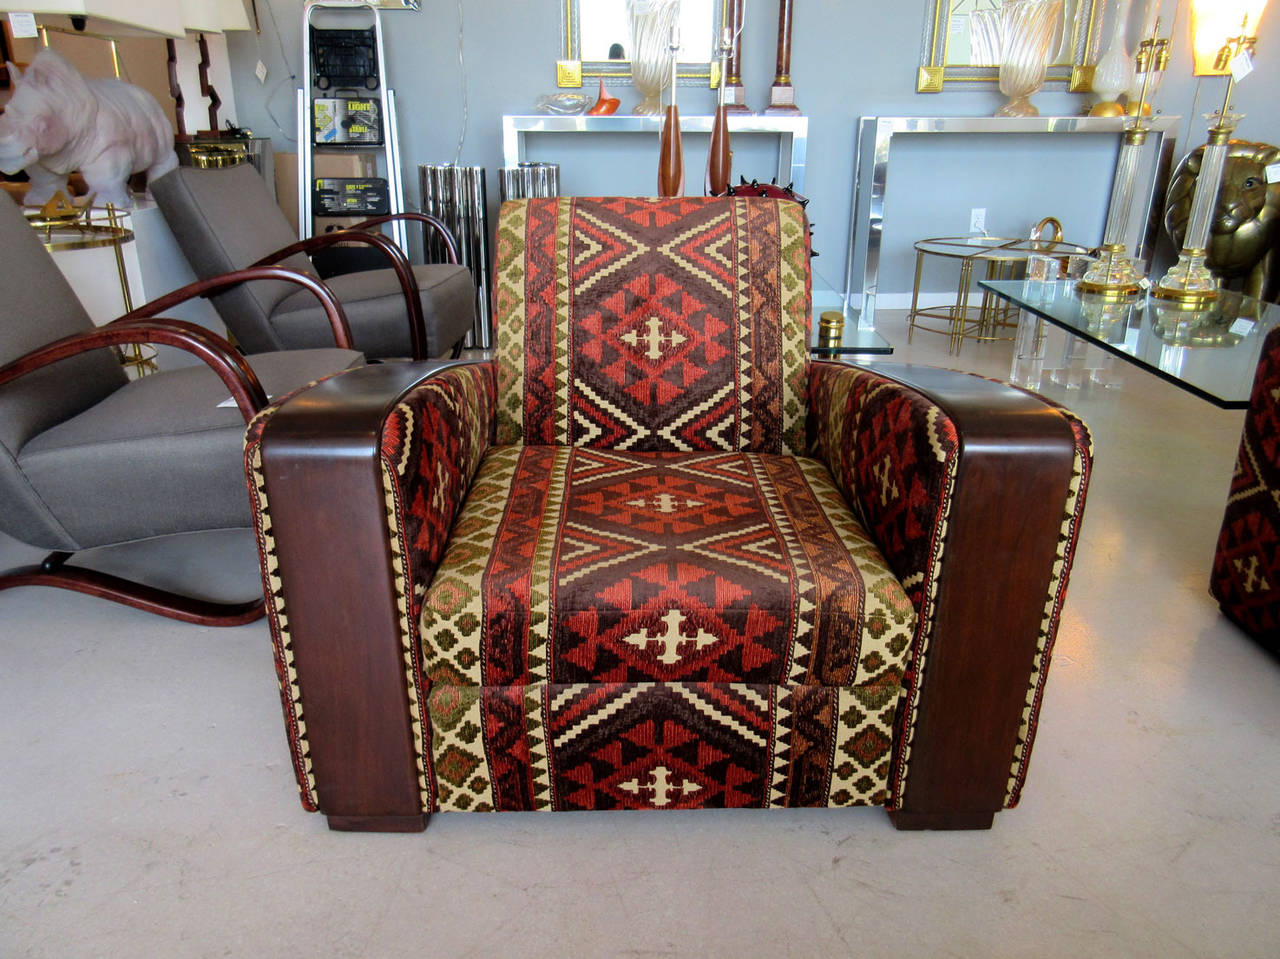 Pair of French art deco club chairs with arm rests and newly upholstered in a bold kilim fabric.